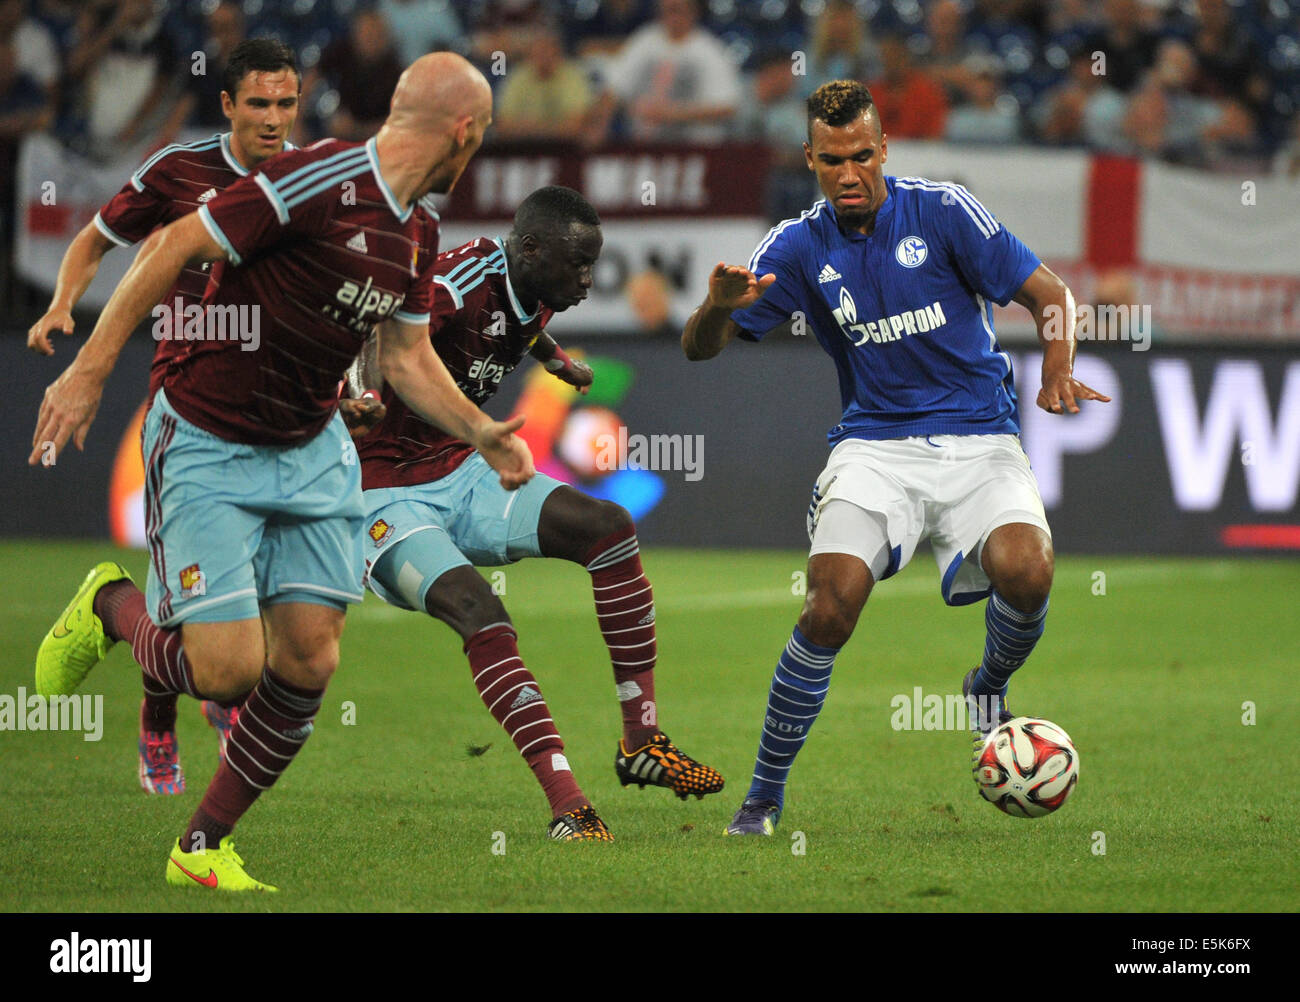 Gelsenkirchen, Germany. 02nd Aug, 2014. Schalke's Eric Maxim Choupo-Moting (R) against West Ham's Cheikhou Kouyate (2-R) during the soccer test match Schalke Cup between FC Schalke 04 and West Ham United at Veltins-Arena in Gelsenkirchen, Germany, 02 August 2014. Photo: Matthias Balk/dpa/Alamy Live News Stock Photo